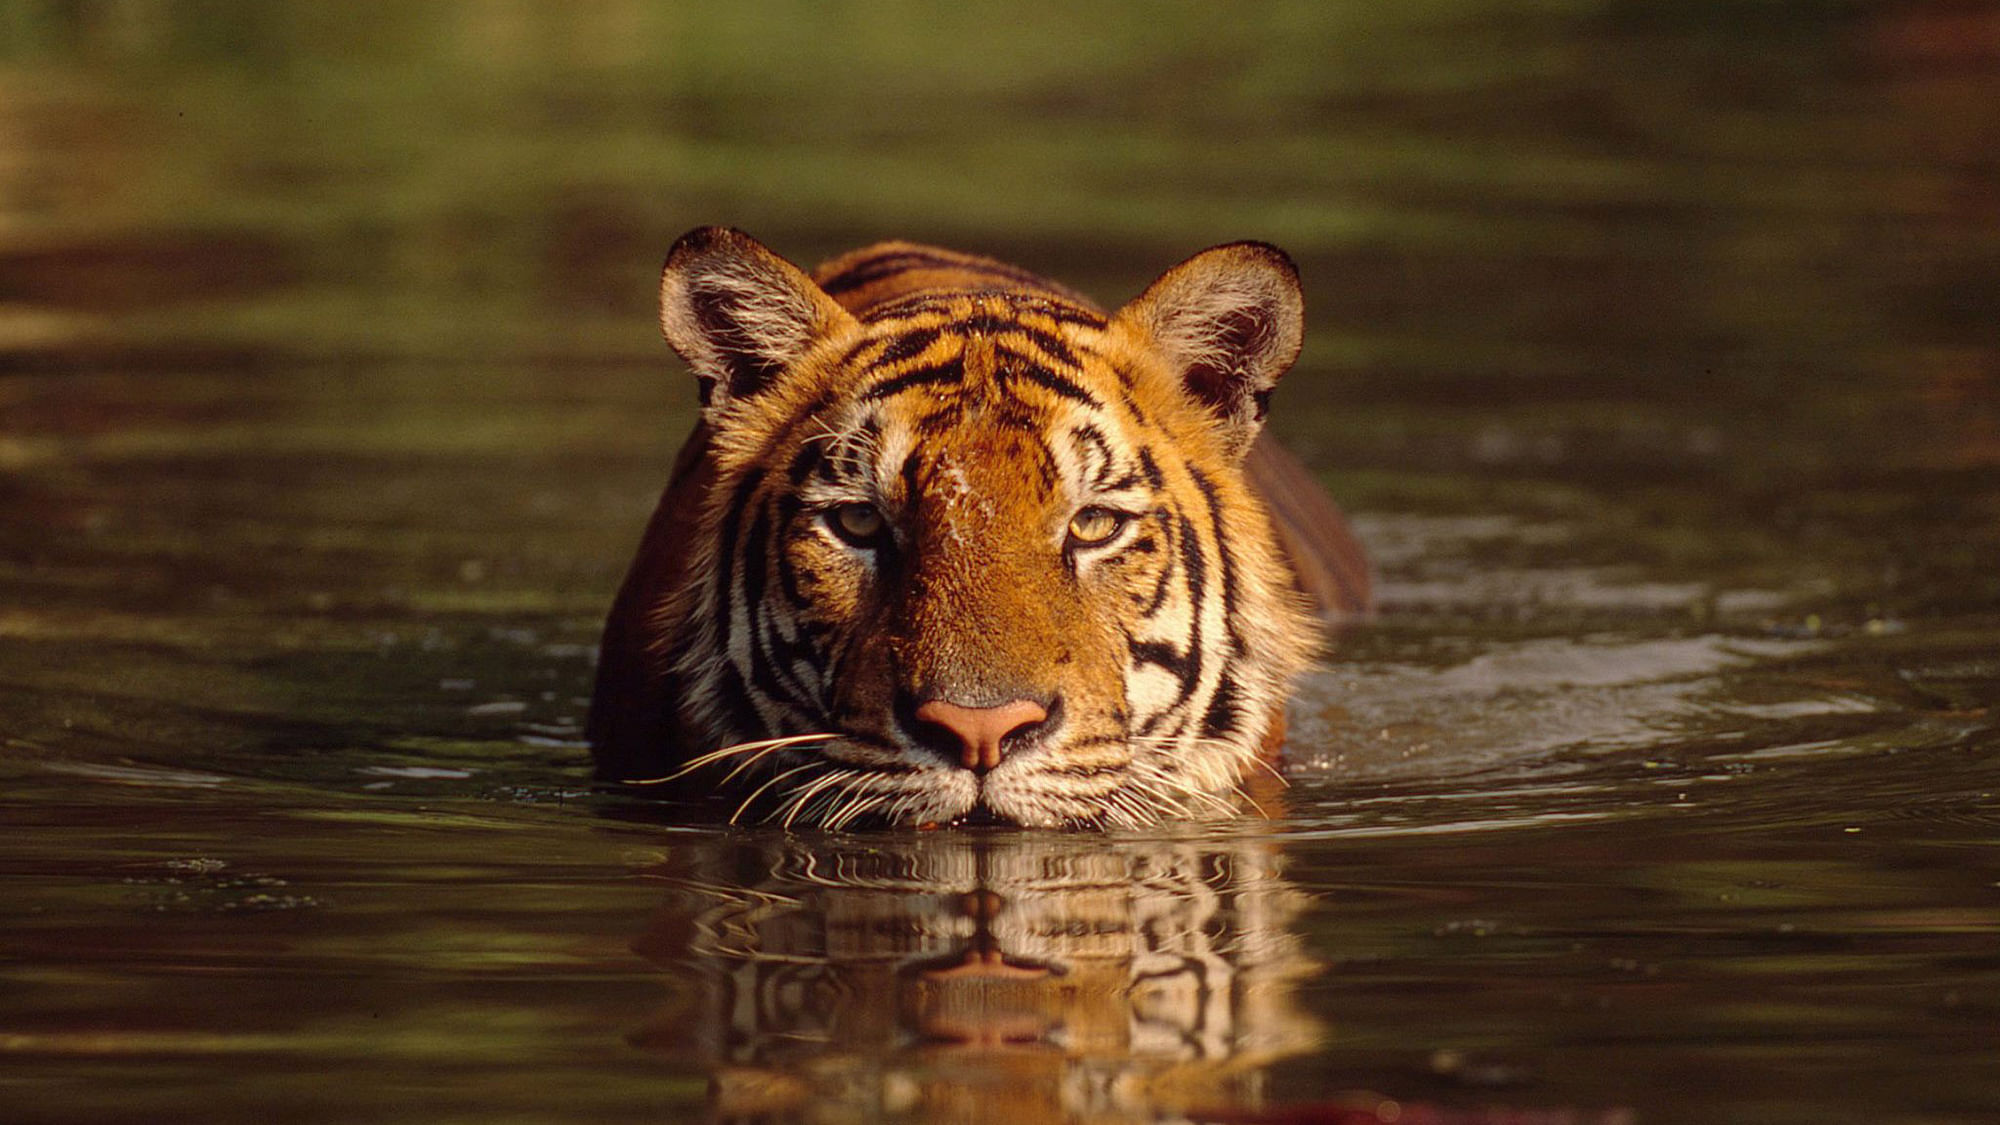 In the last year, 14 cases of tiger-poaching have been recorded on the India-Nepal border. (Photo: iStock)